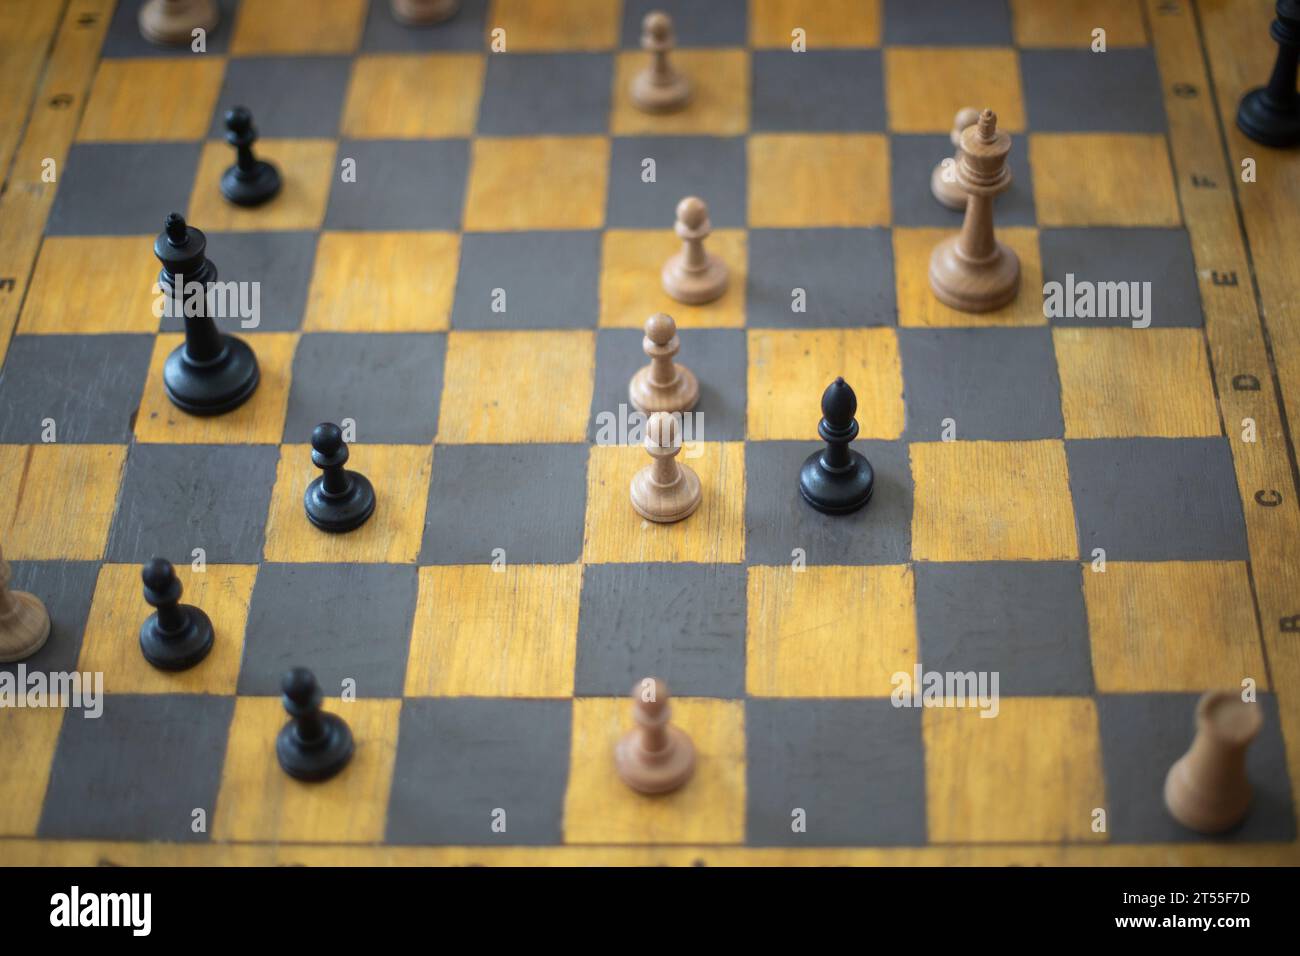 Playing chess in tournament. Chess pieces on board. Stock Photo